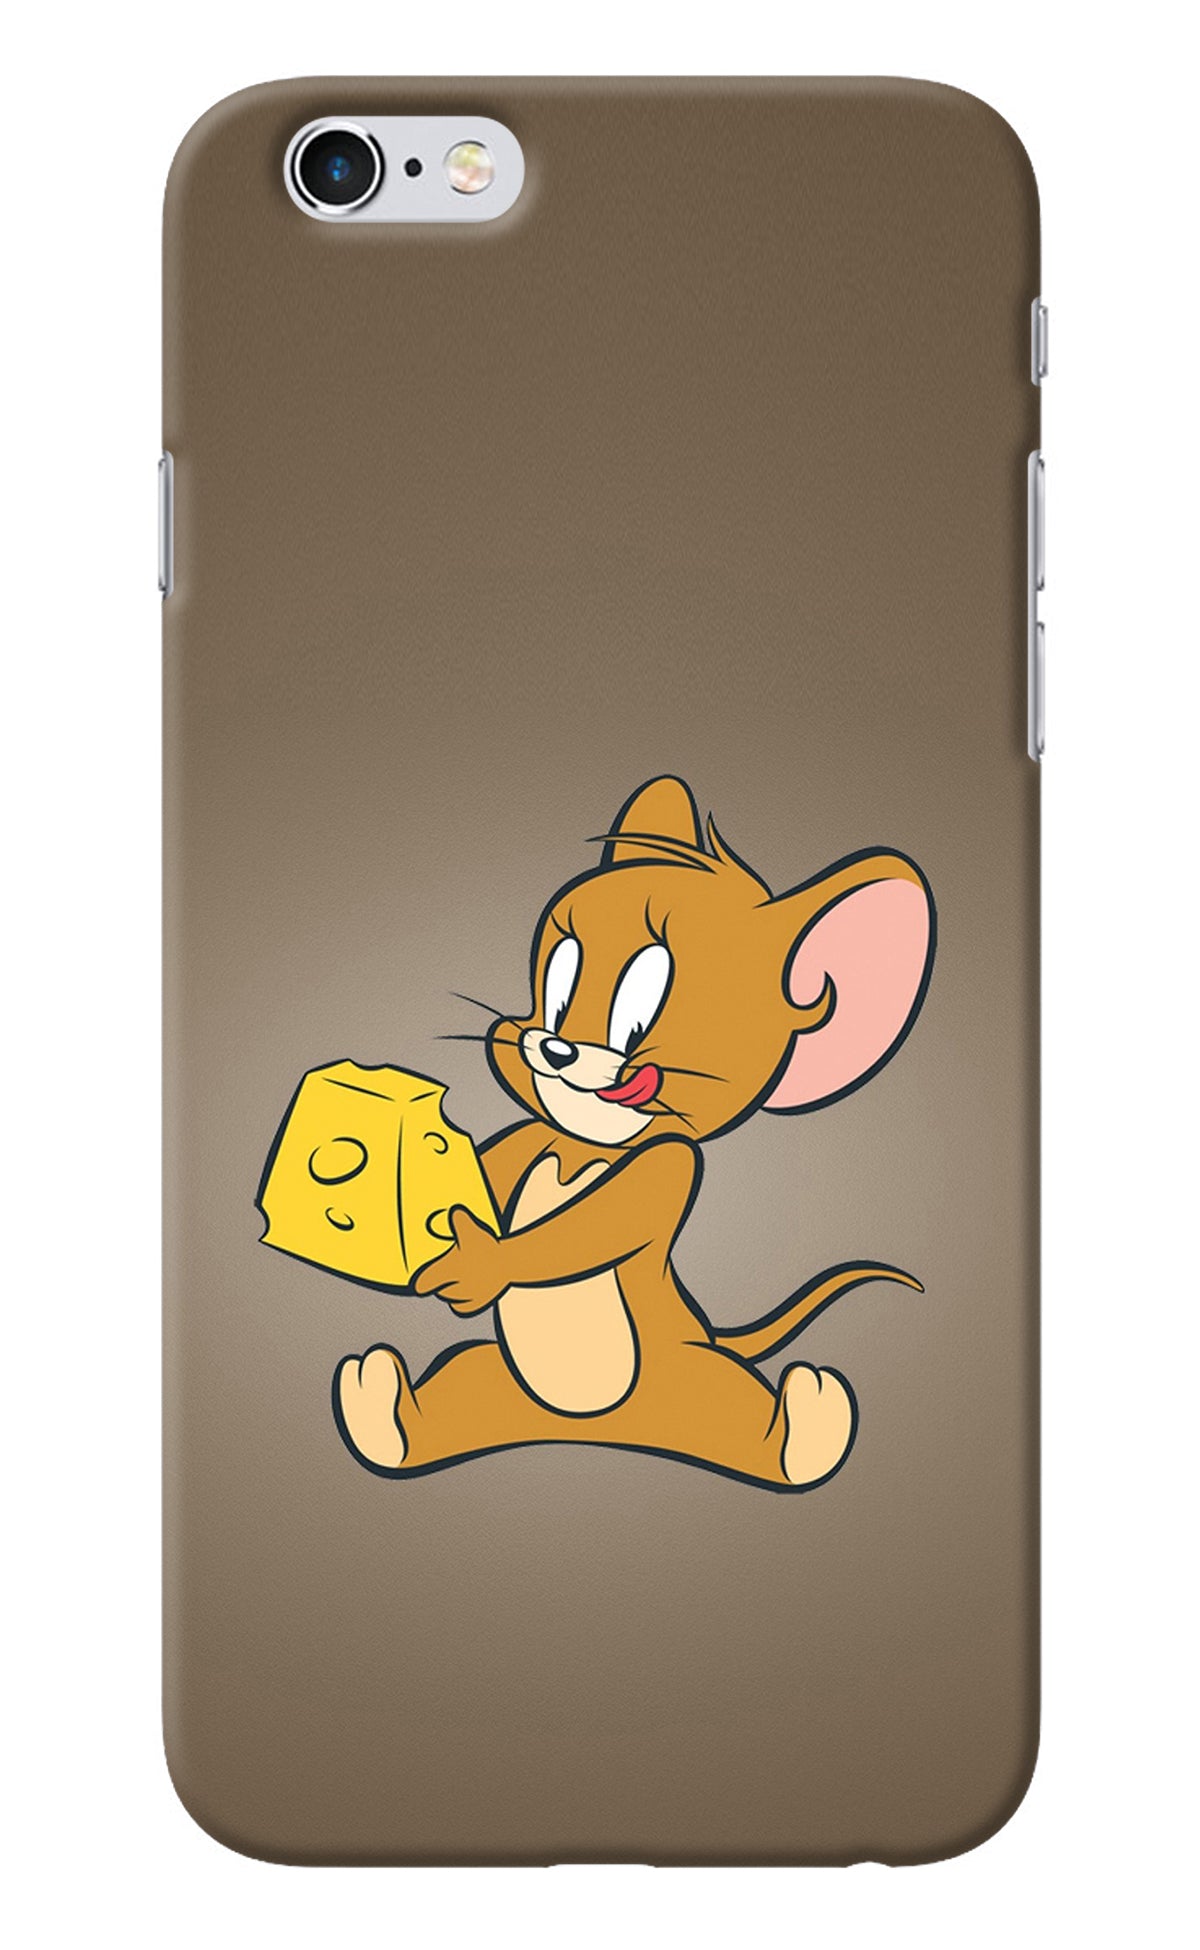 Jerry iPhone 6/6s Back Cover